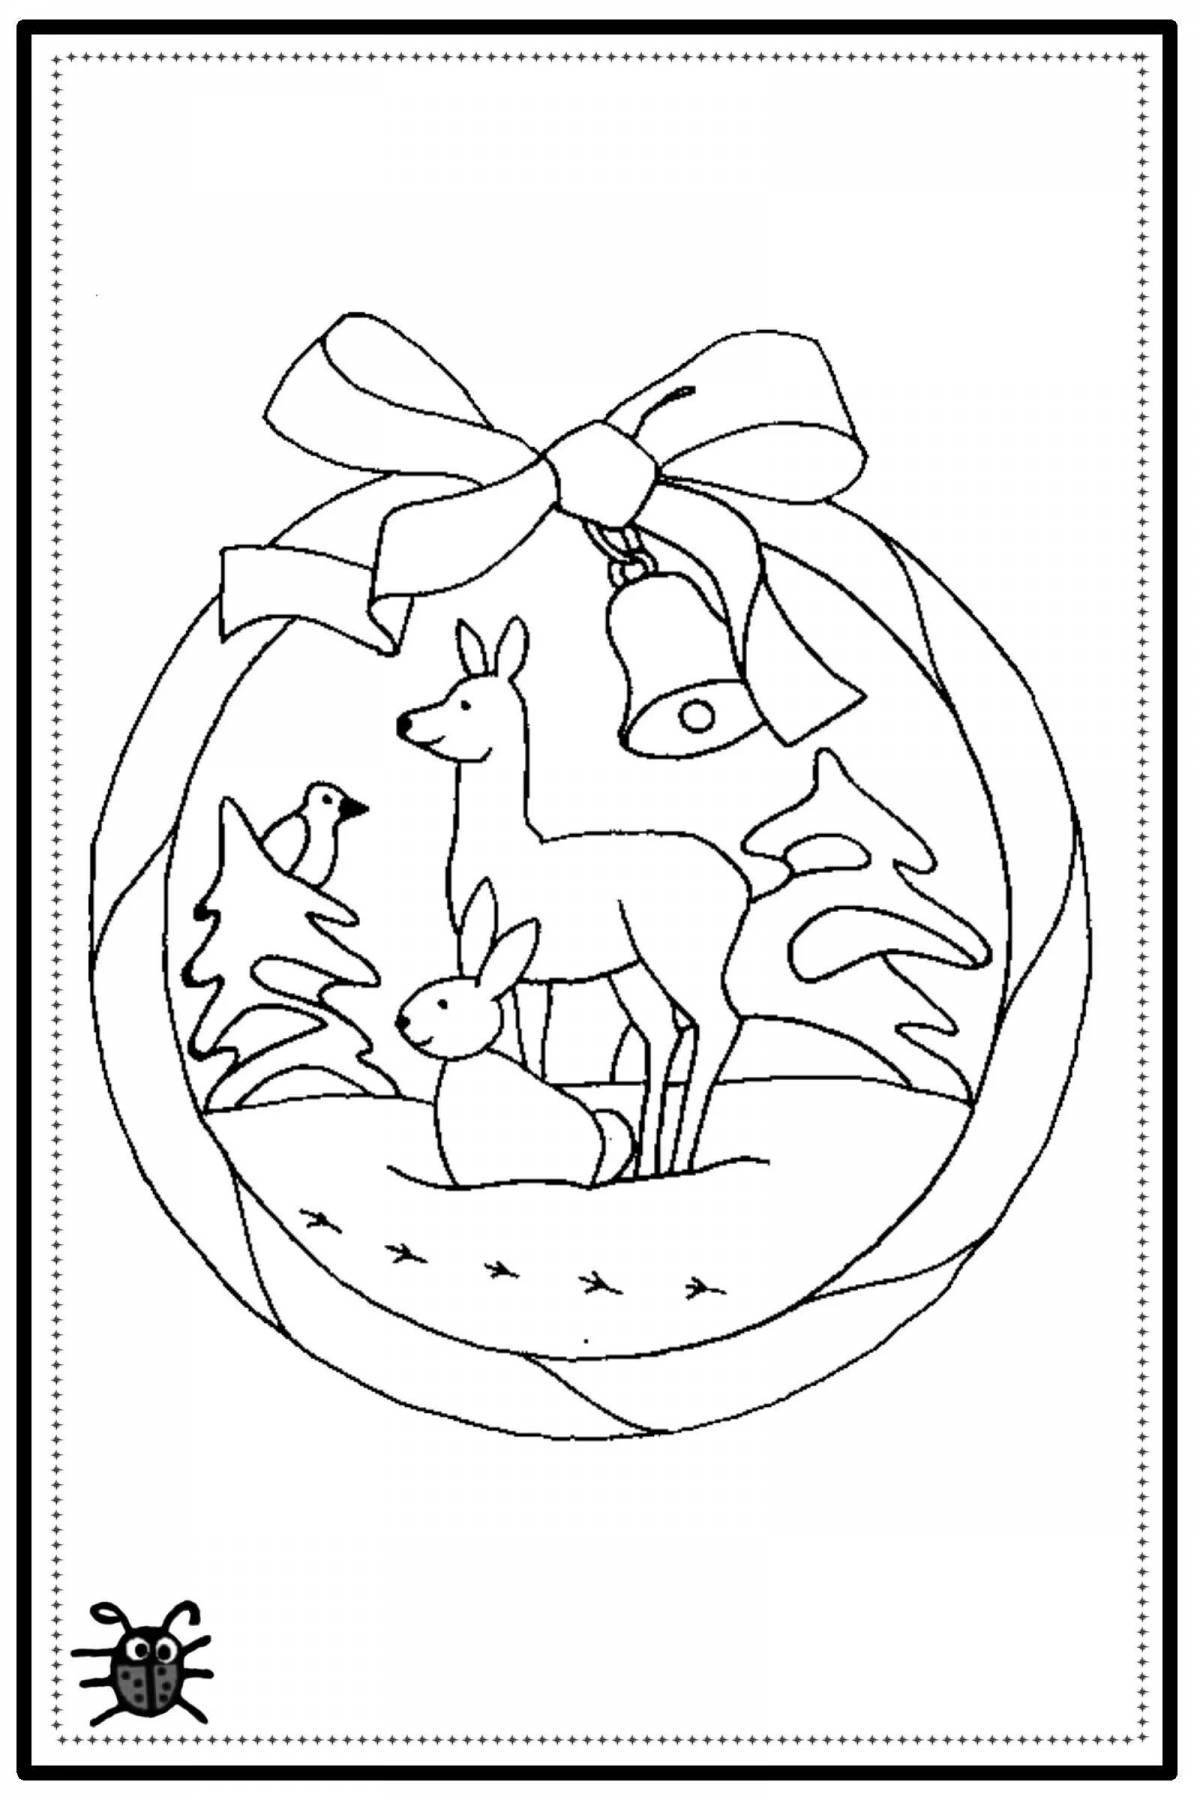 Whimsical Christmas coloring book for 4-5 year olds